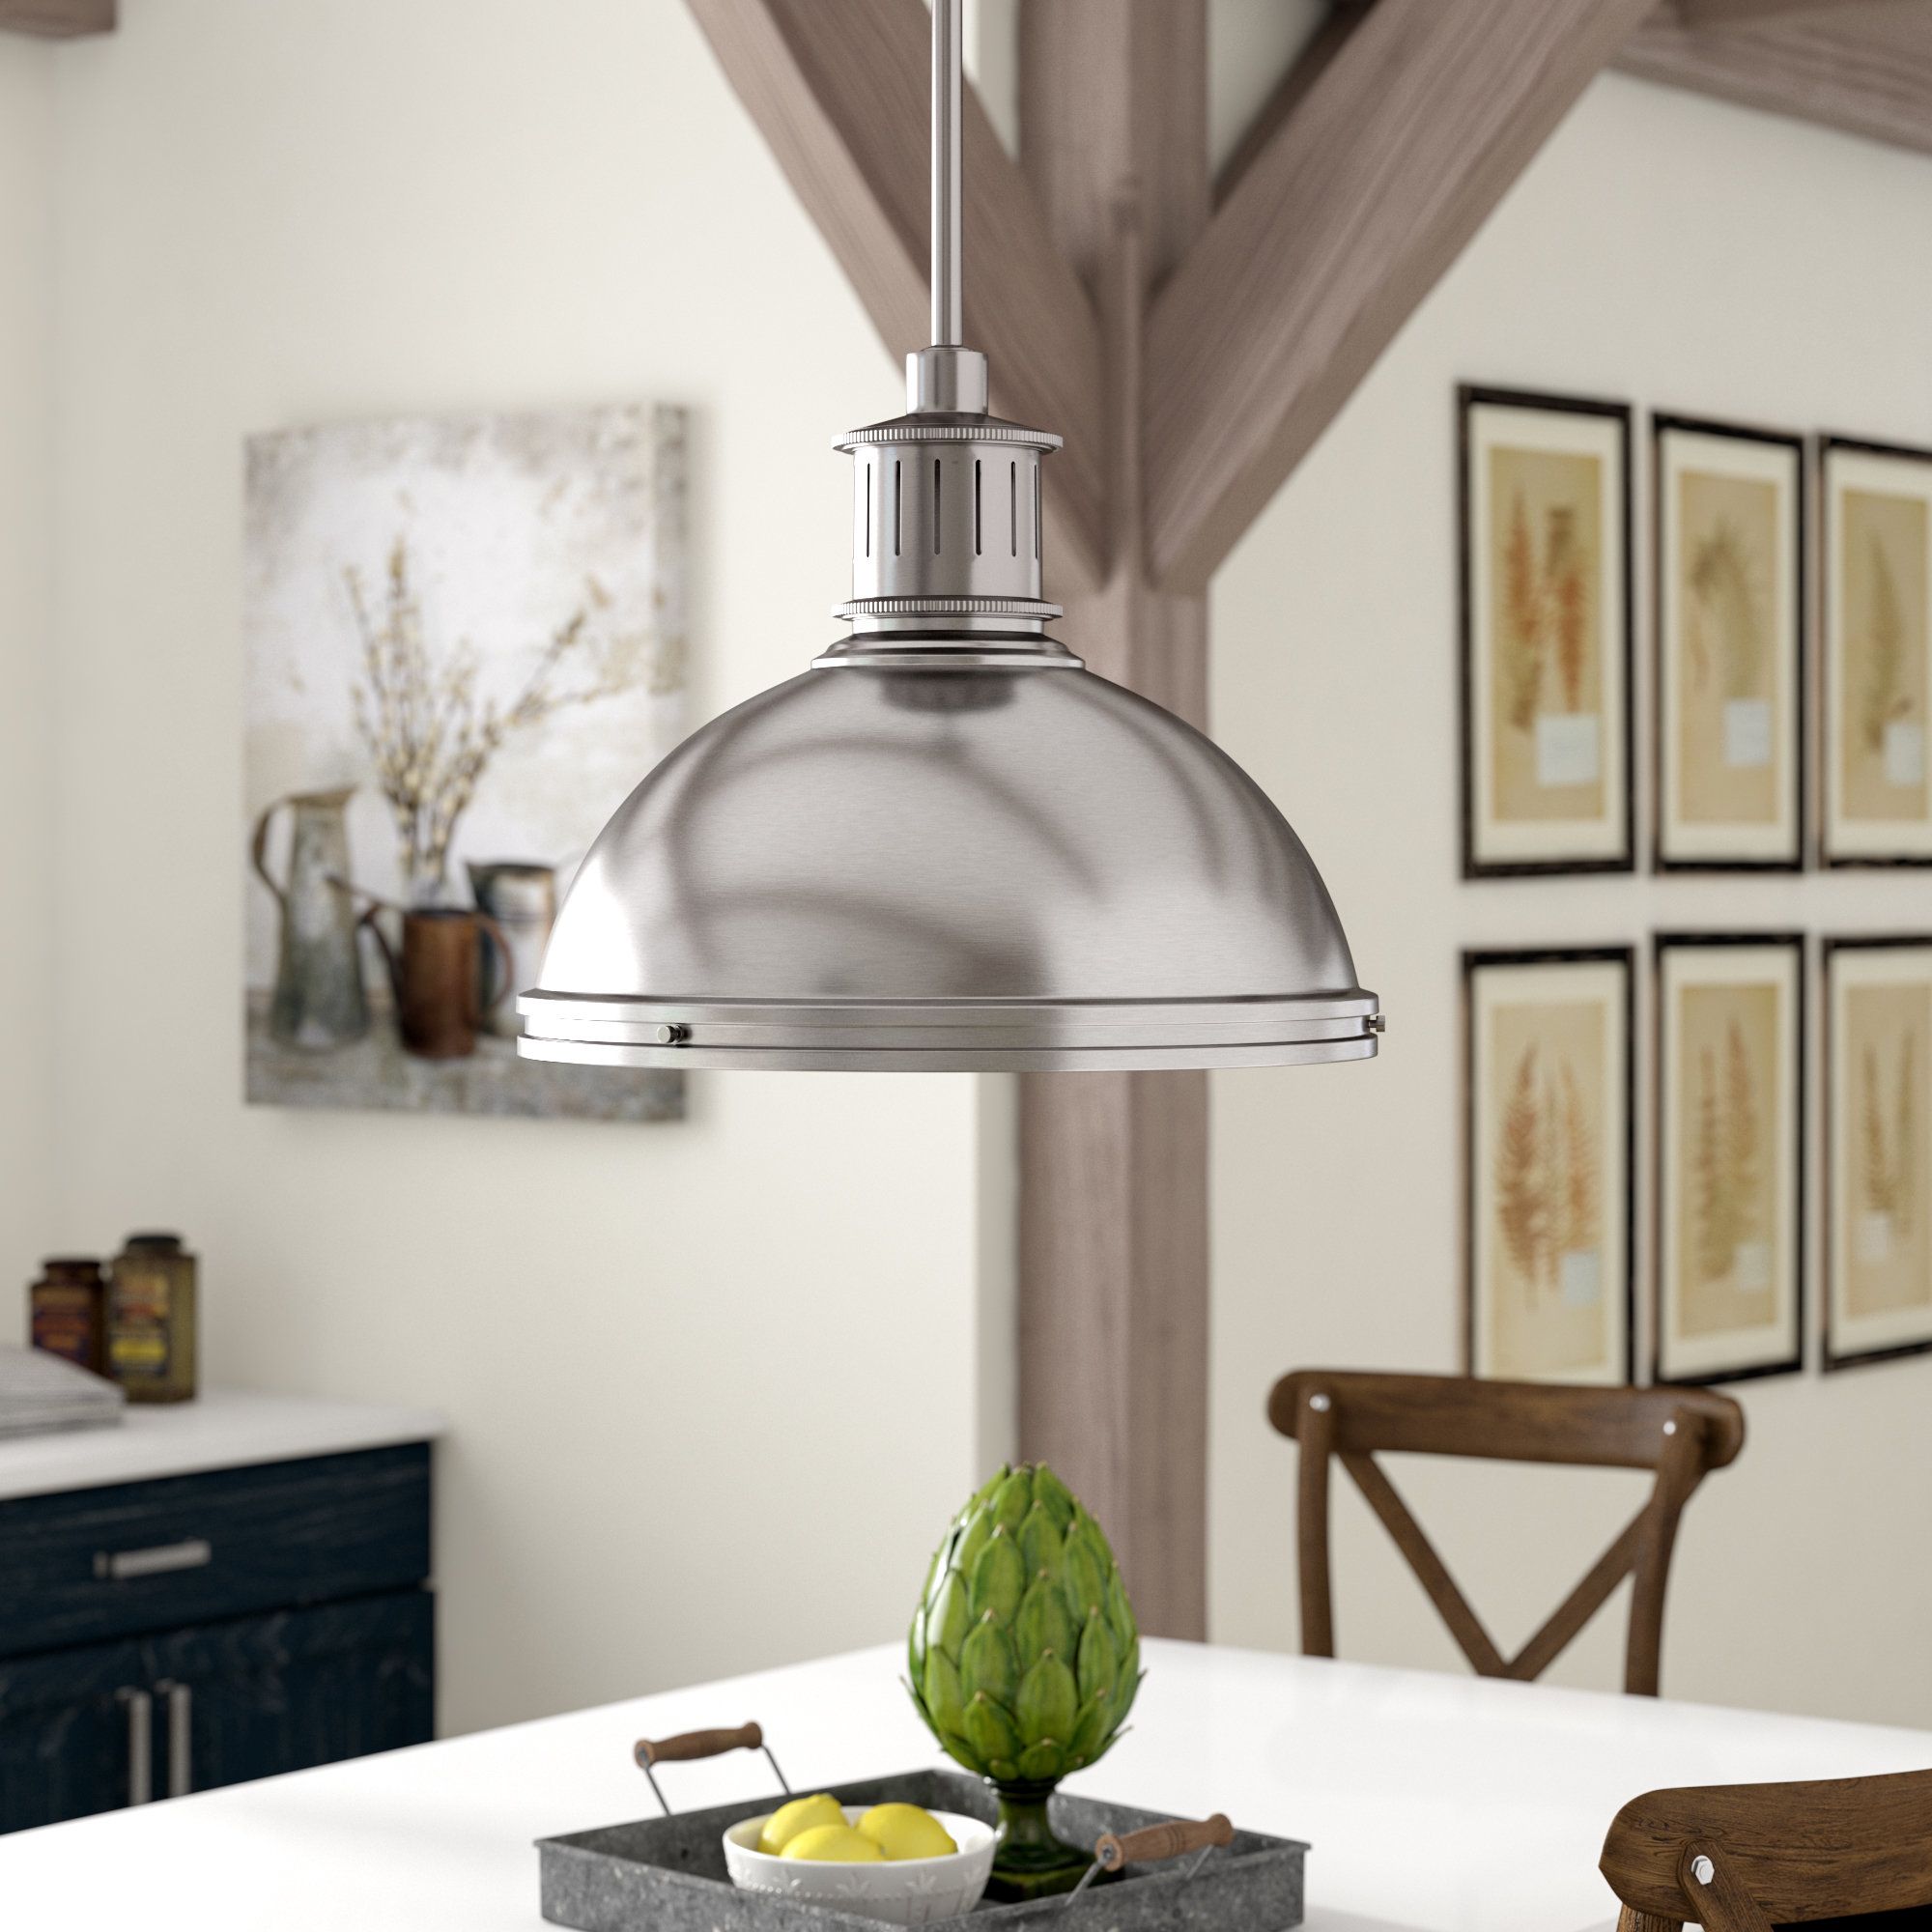 Orchard Hill 1 Light Led Single Dome Pendant With Regard To Most Current Ninette 1 Light Dome Pendants (View 16 of 25)